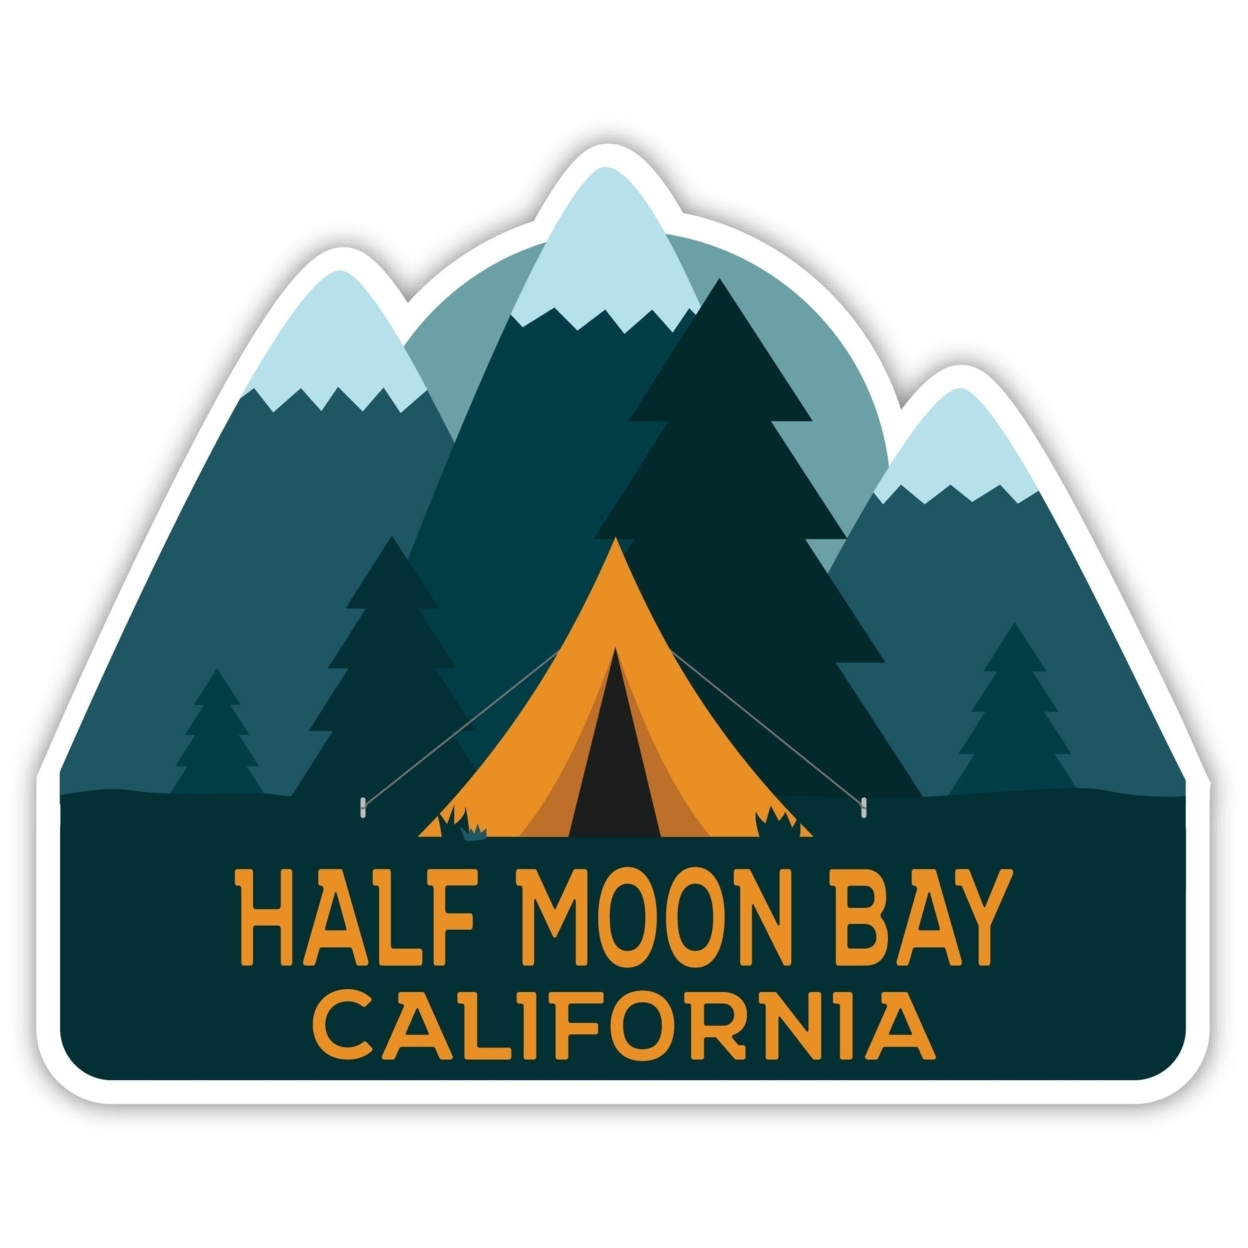 Half Moon Bay California Souvenir Decorative Stickers (Choose Theme And Size) - 4-Pack, 12-Inch, Bear